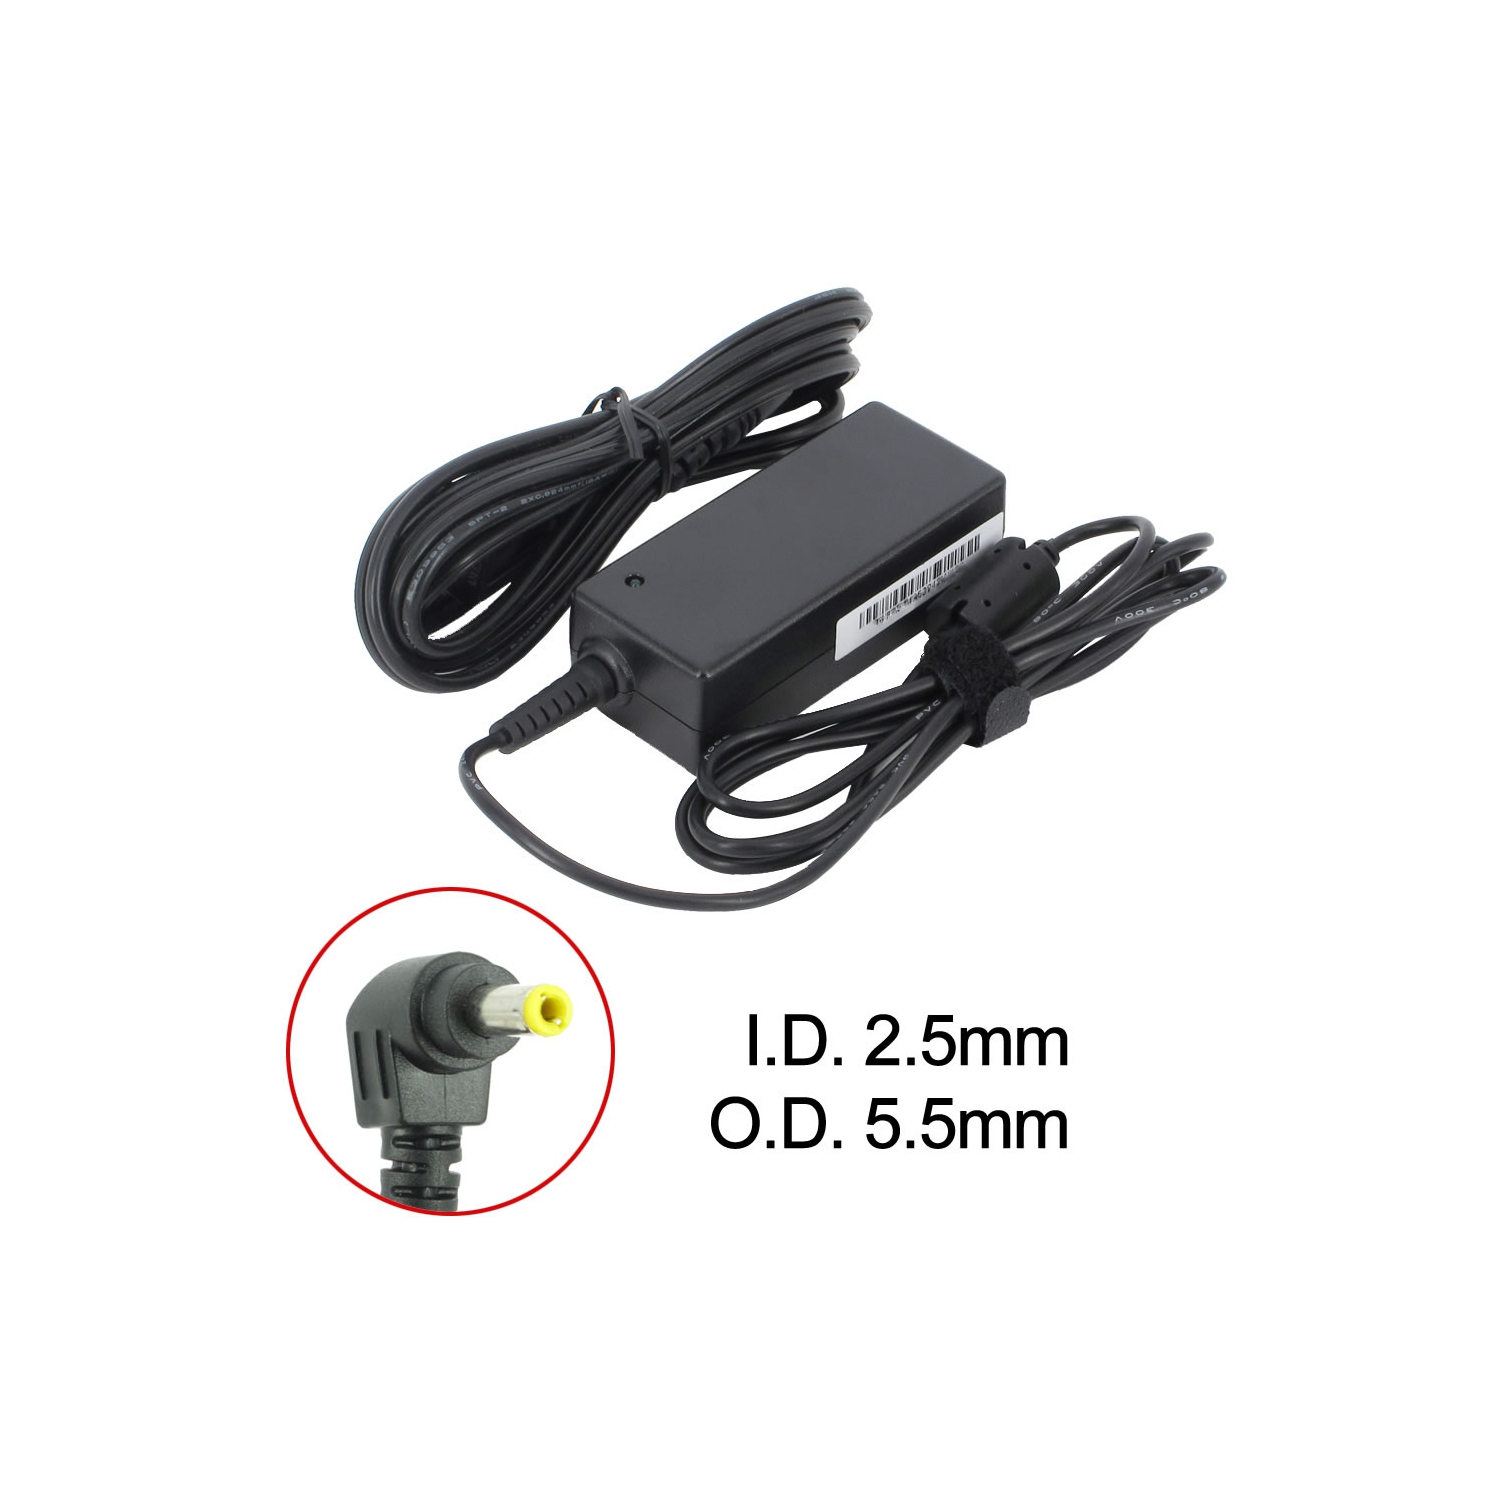 BattDepot: New Laptop AC Adapter for Lenovo 42T4455, ADP-40NH B, 31038046, 41R4447, 45K2201, 55Y9367, 57Y6367